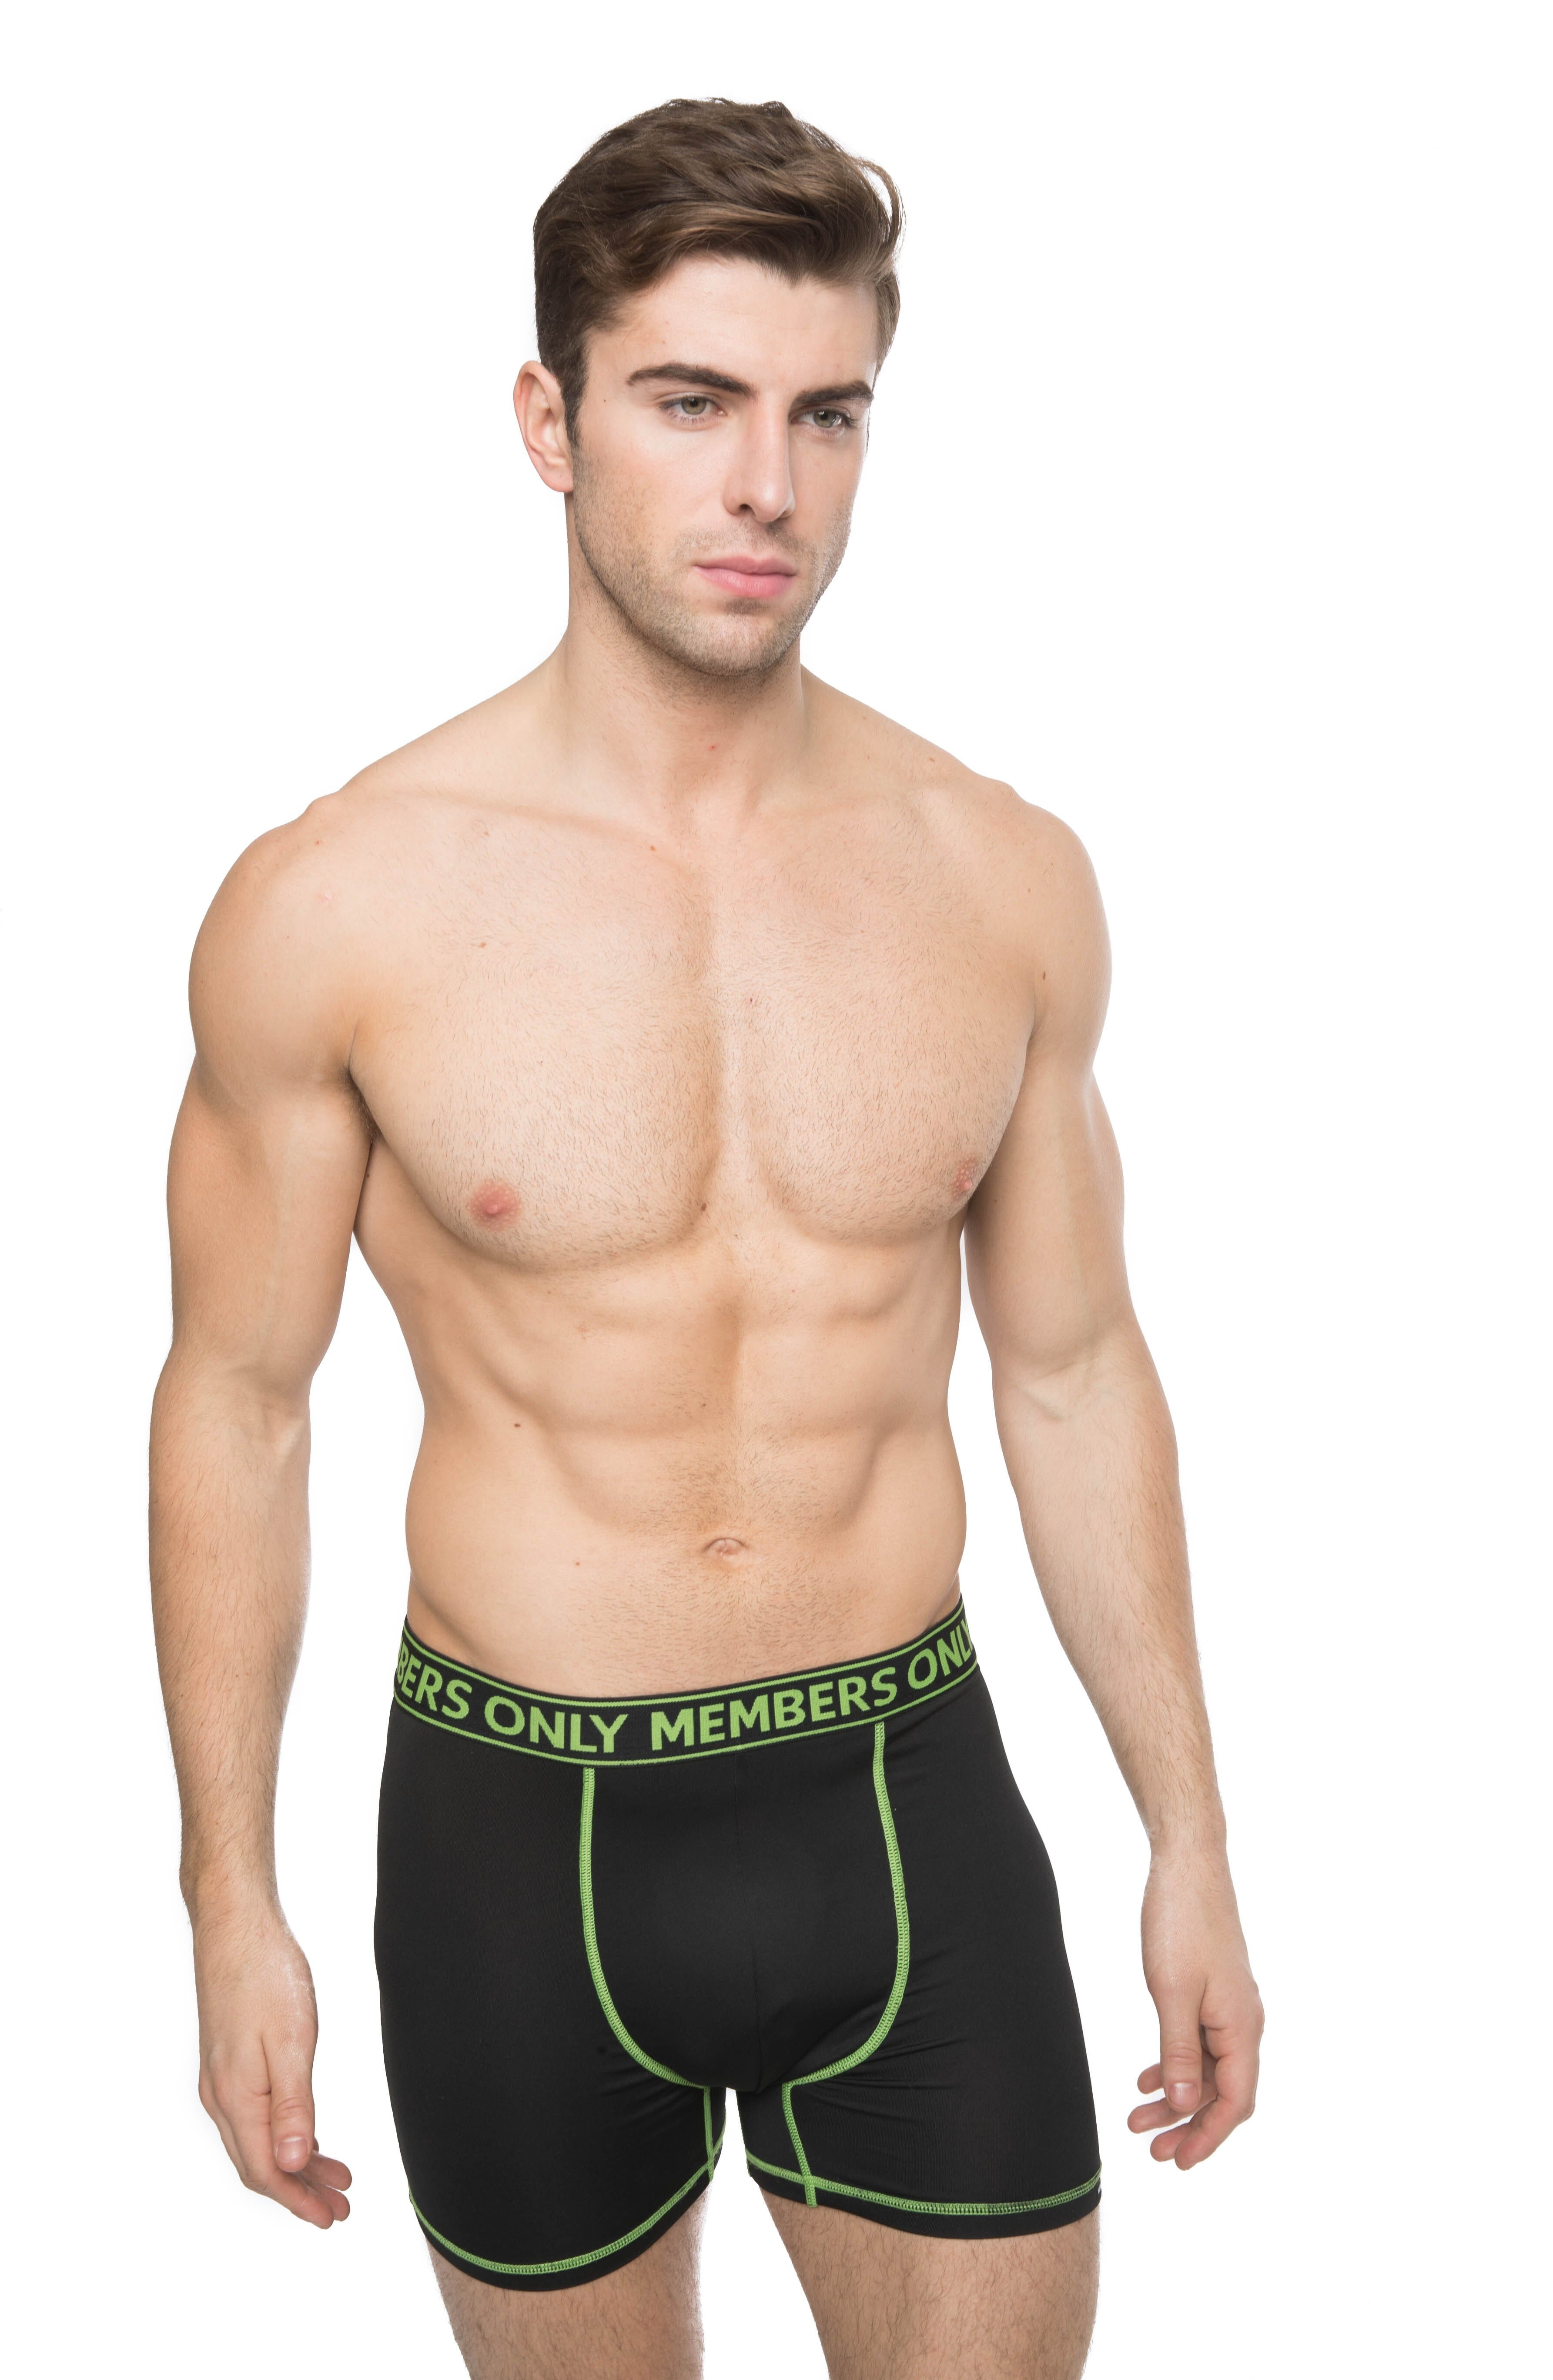 Members Only Athletic Underwear for Men's